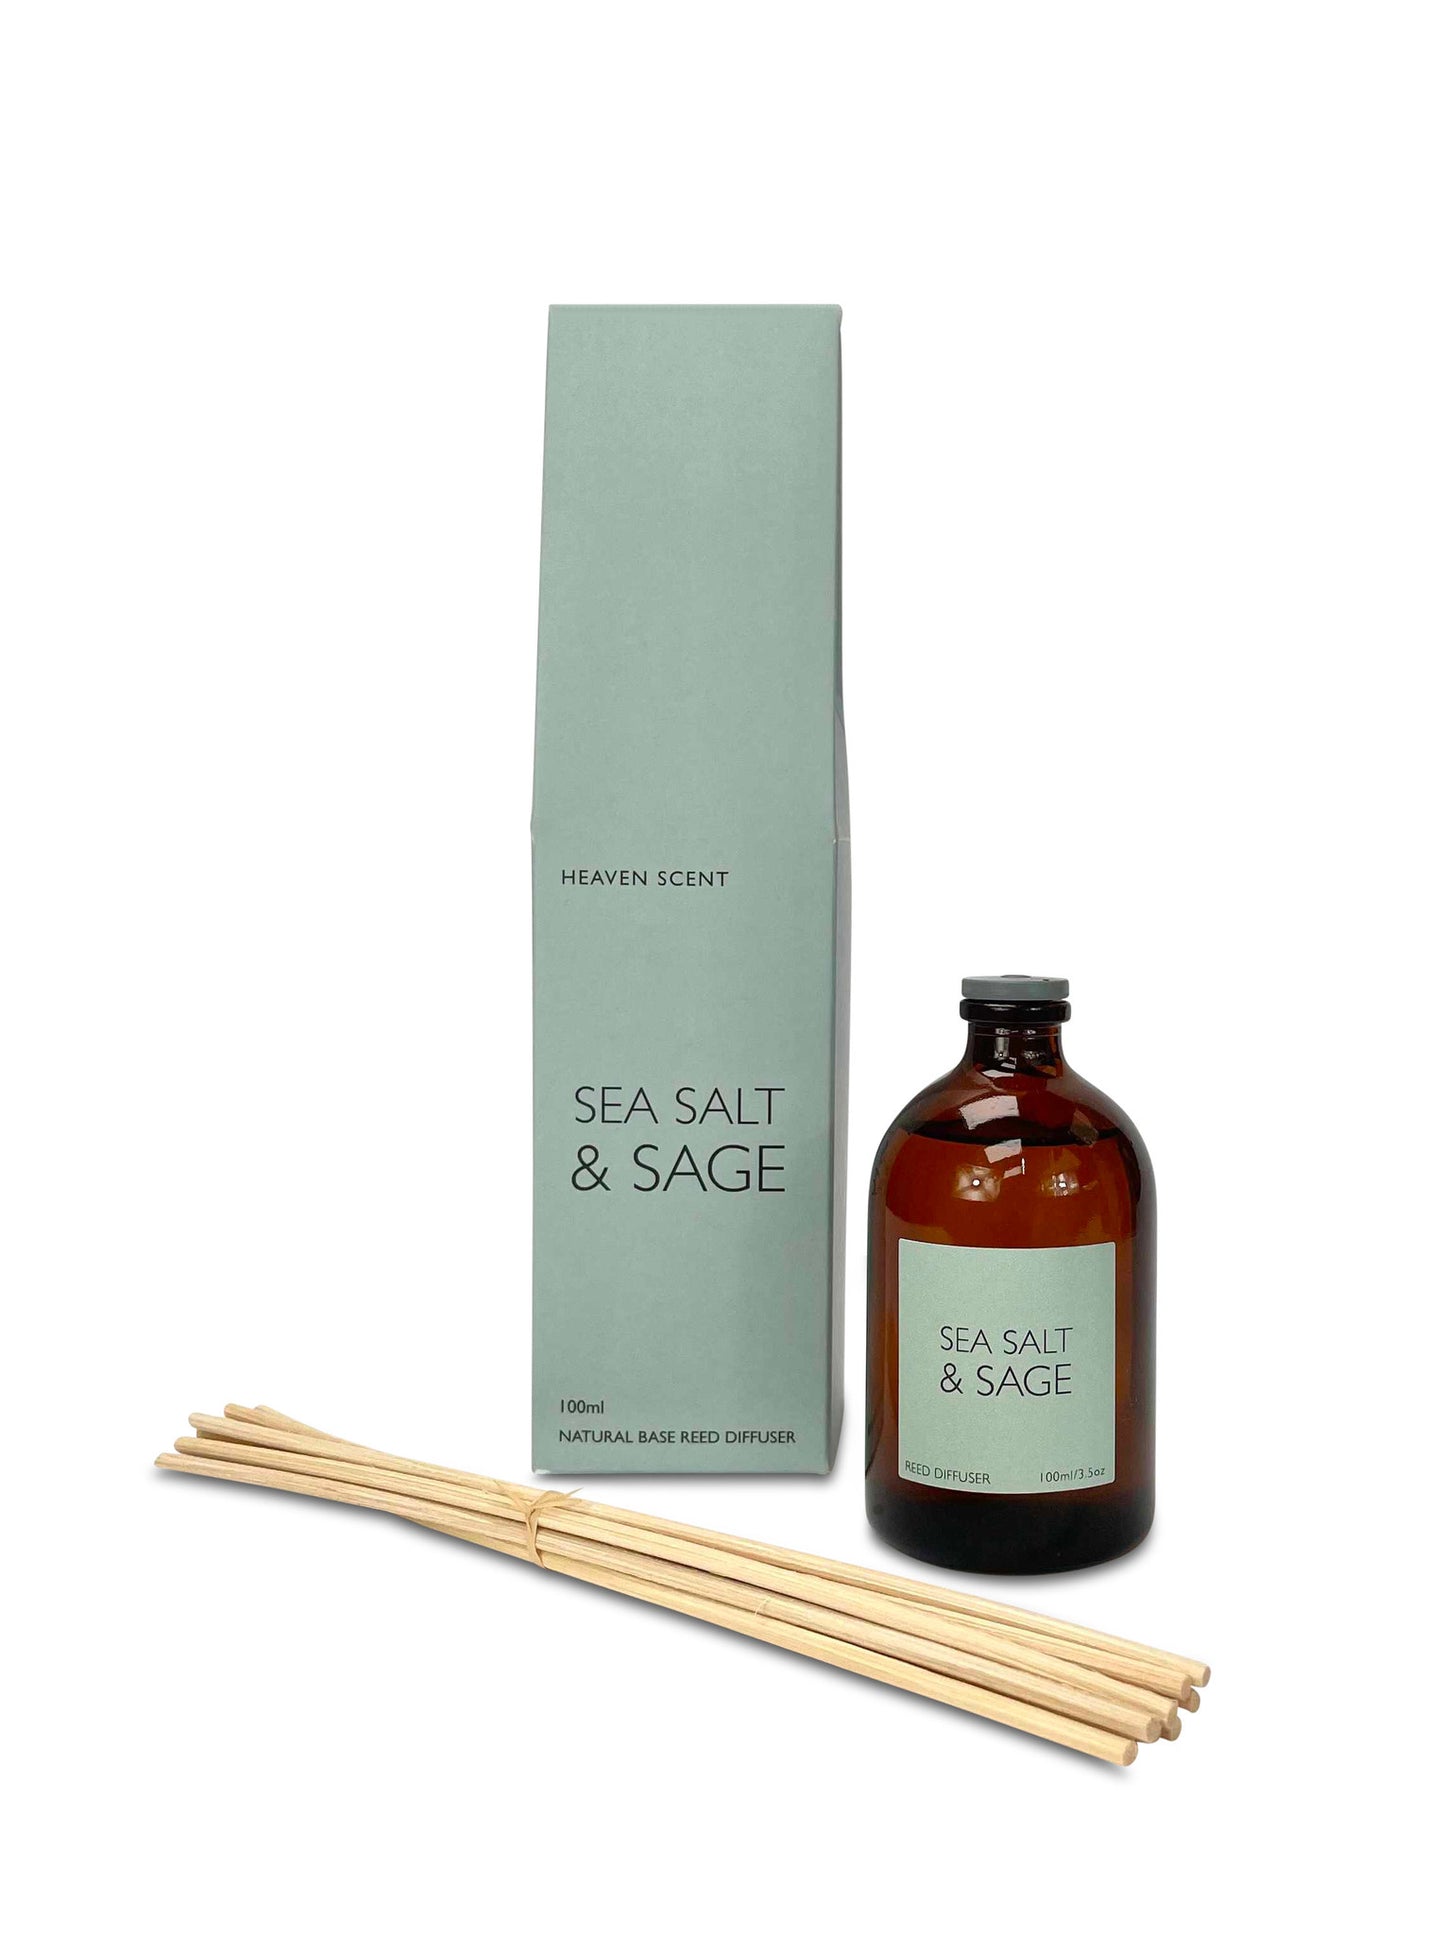 Sea Salt & Sage Reed Diffuser is warm salty air wafting in the breeze while Sage offers an earthy aroma with an herbaceous scent.